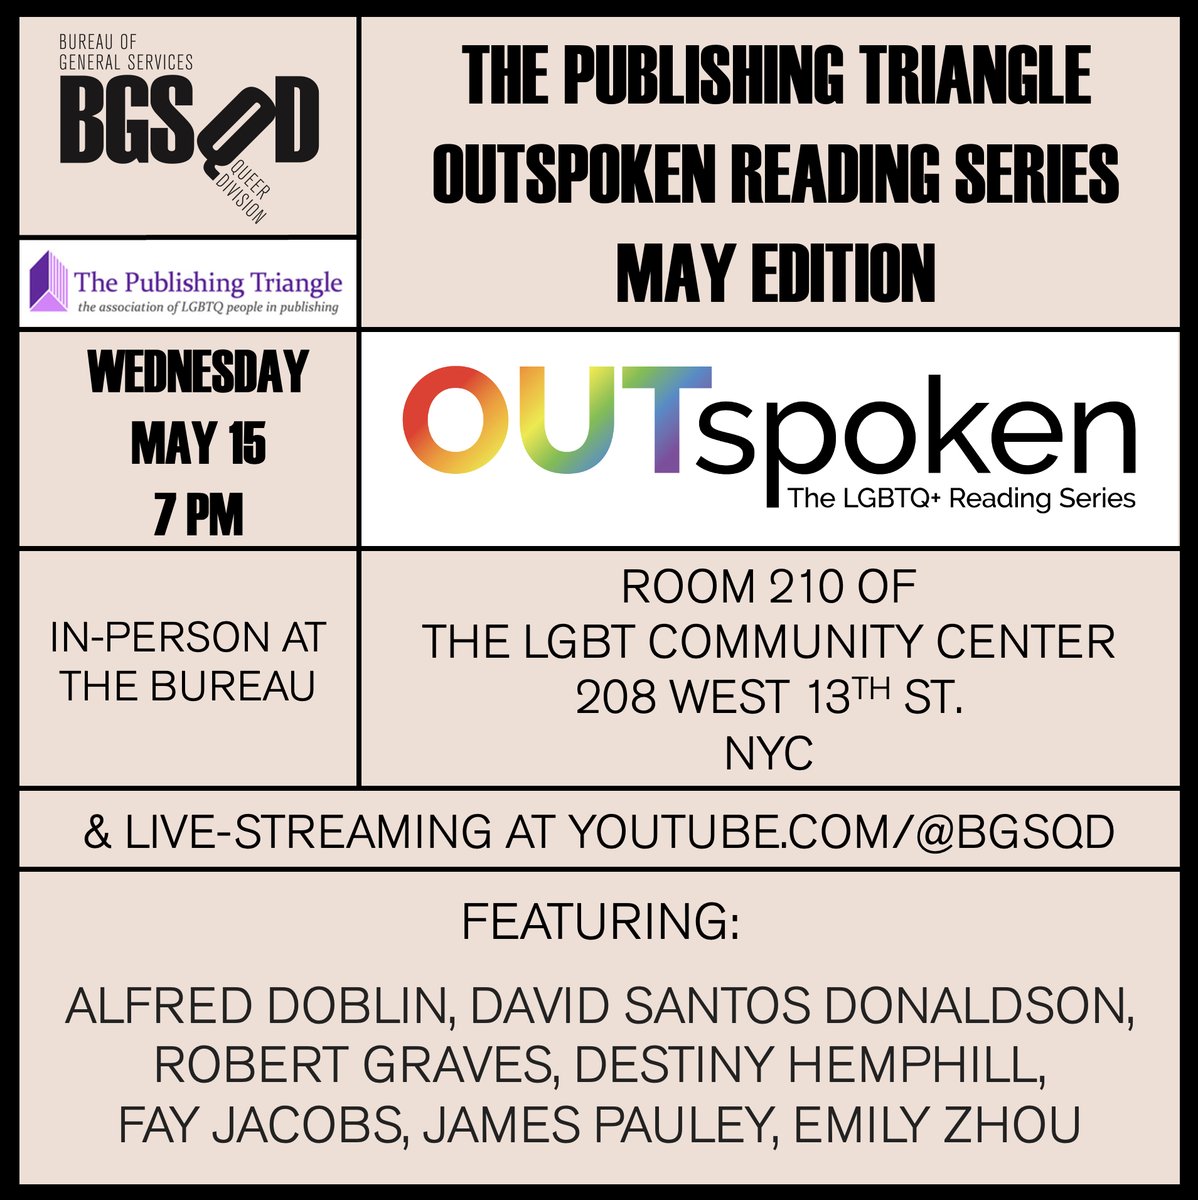 Come join us Wednesday, May 15th at 7pm for our OUTspoken series- hosted at the LGBT Community Center at 208 West 13th St, NYC. Featuring Alfred Doblin, David Santos Donaldson, Robert Graves, Destiny Hemphill, Fay Jacobs, James Pauley, and Emily Zhou!